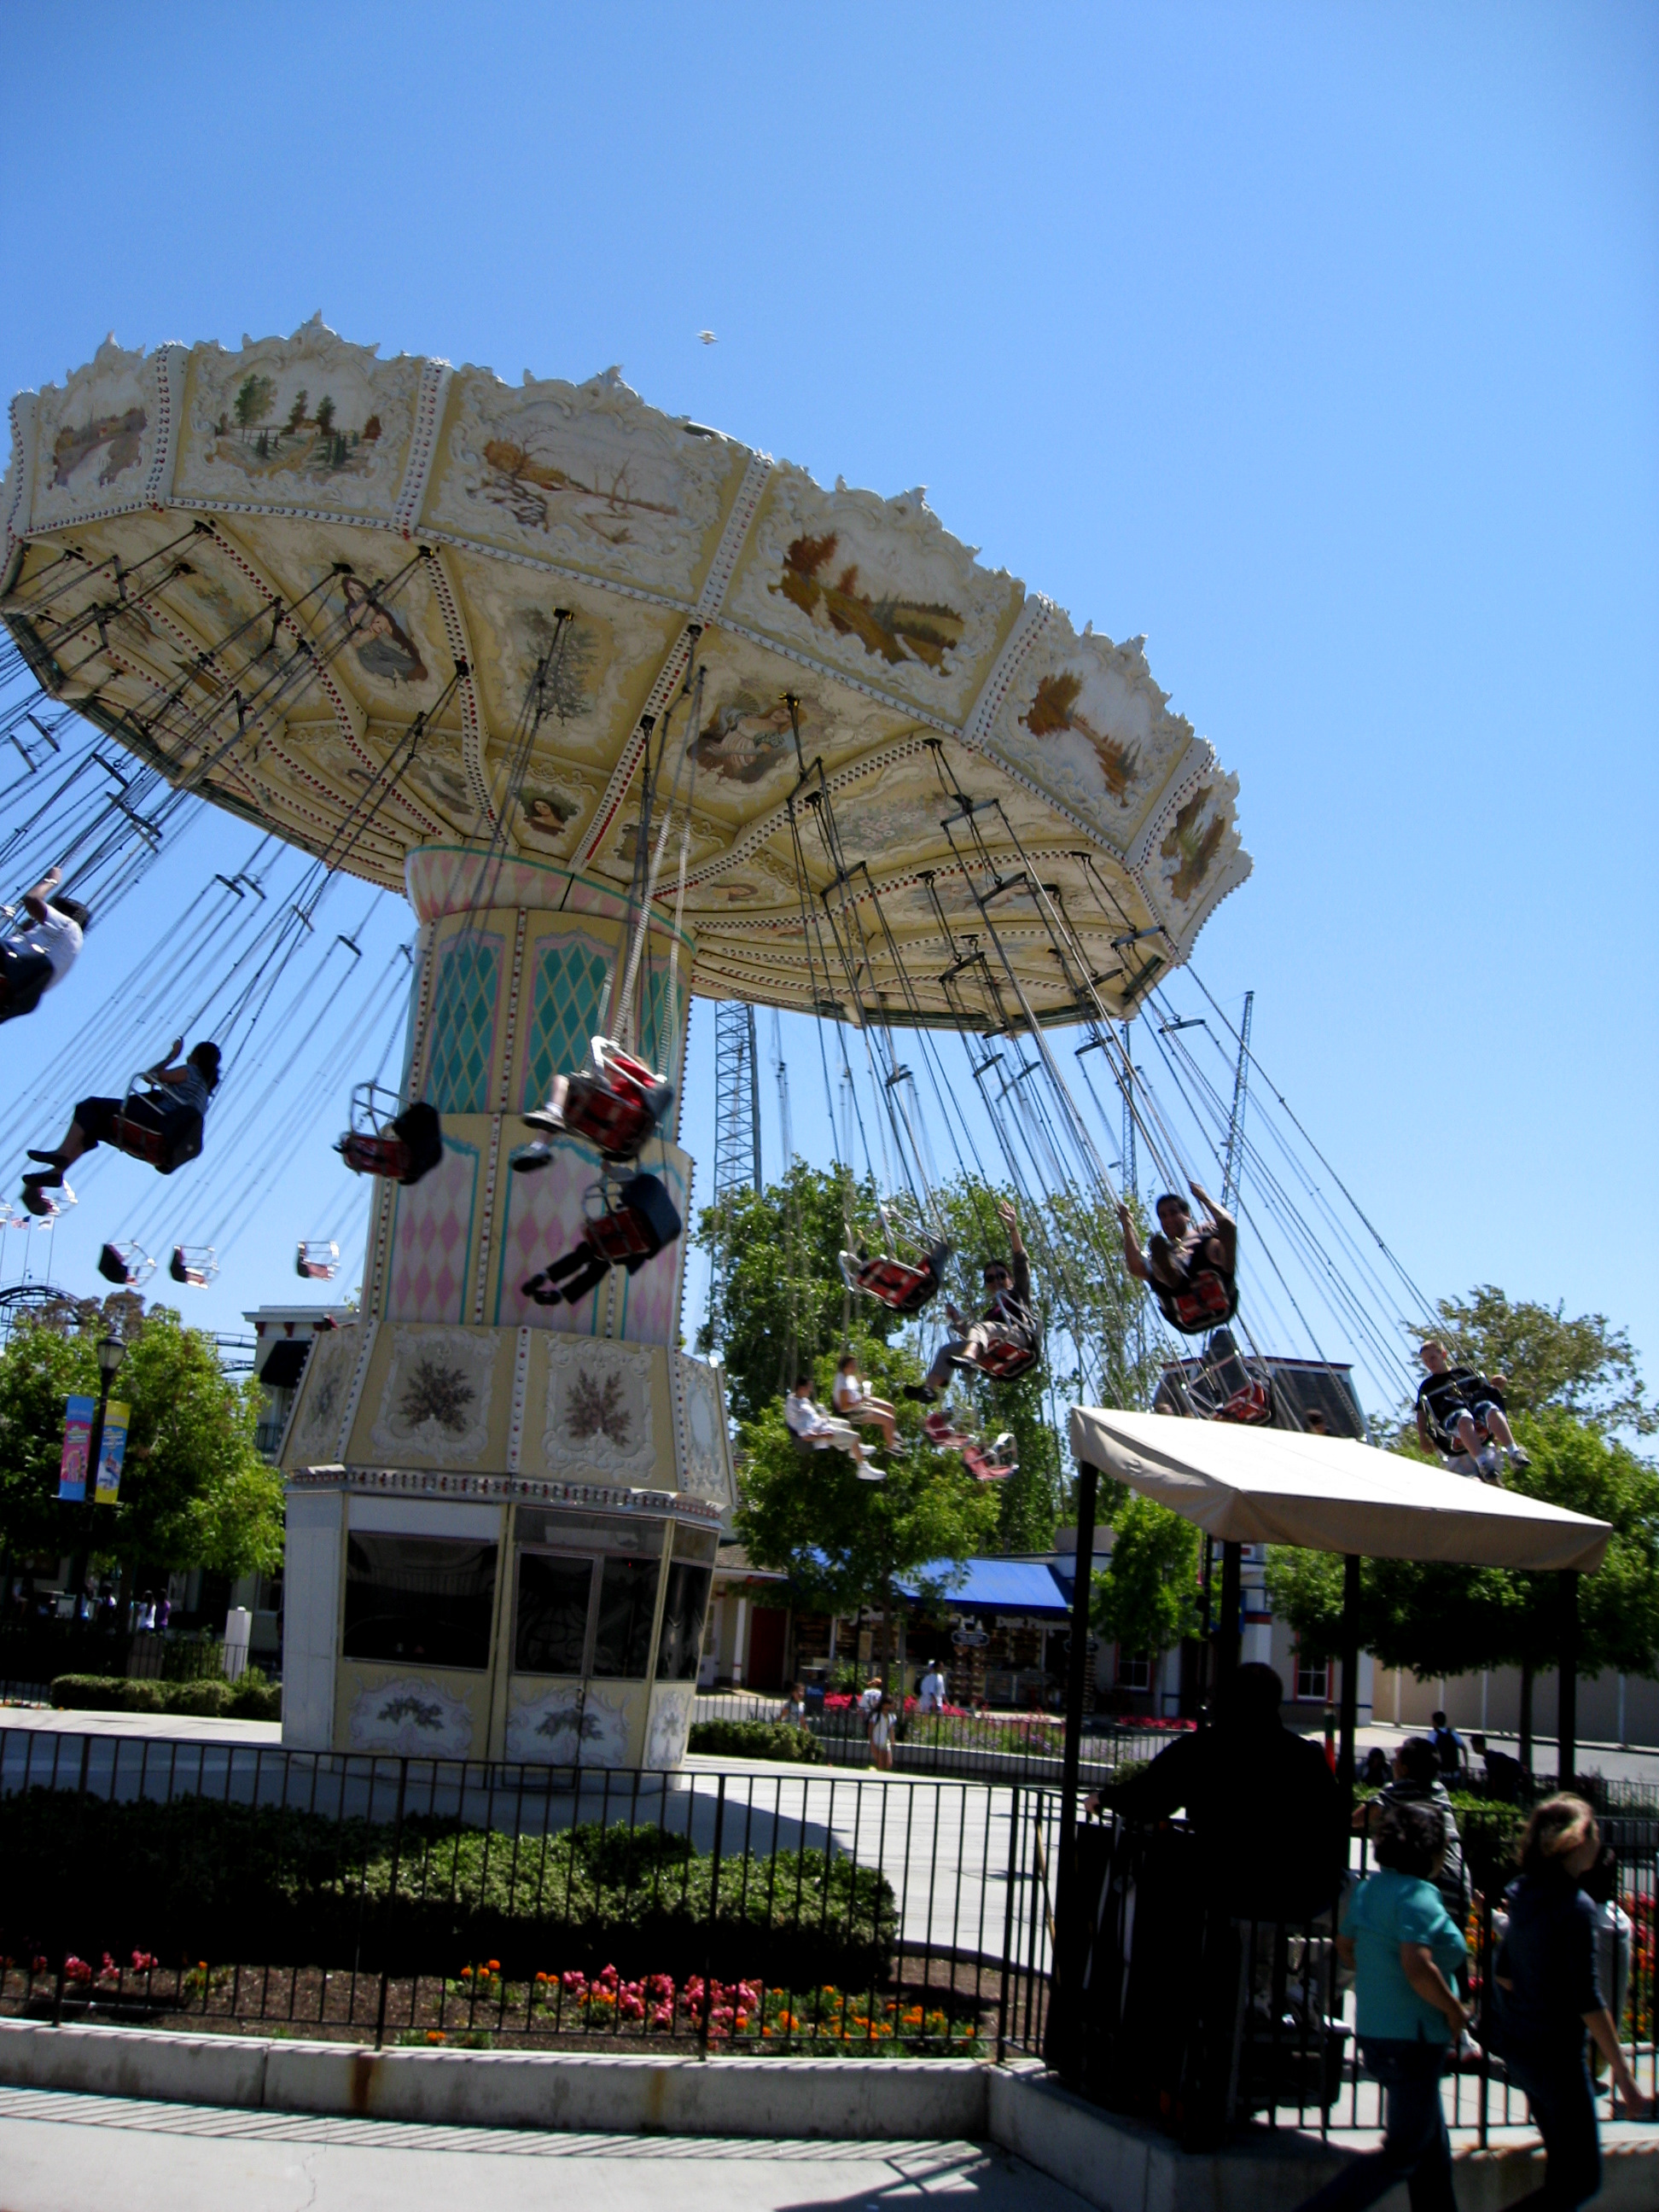 Swingin at Great American, Activity, Carousel, Entertainment, Fast, HQ Photo